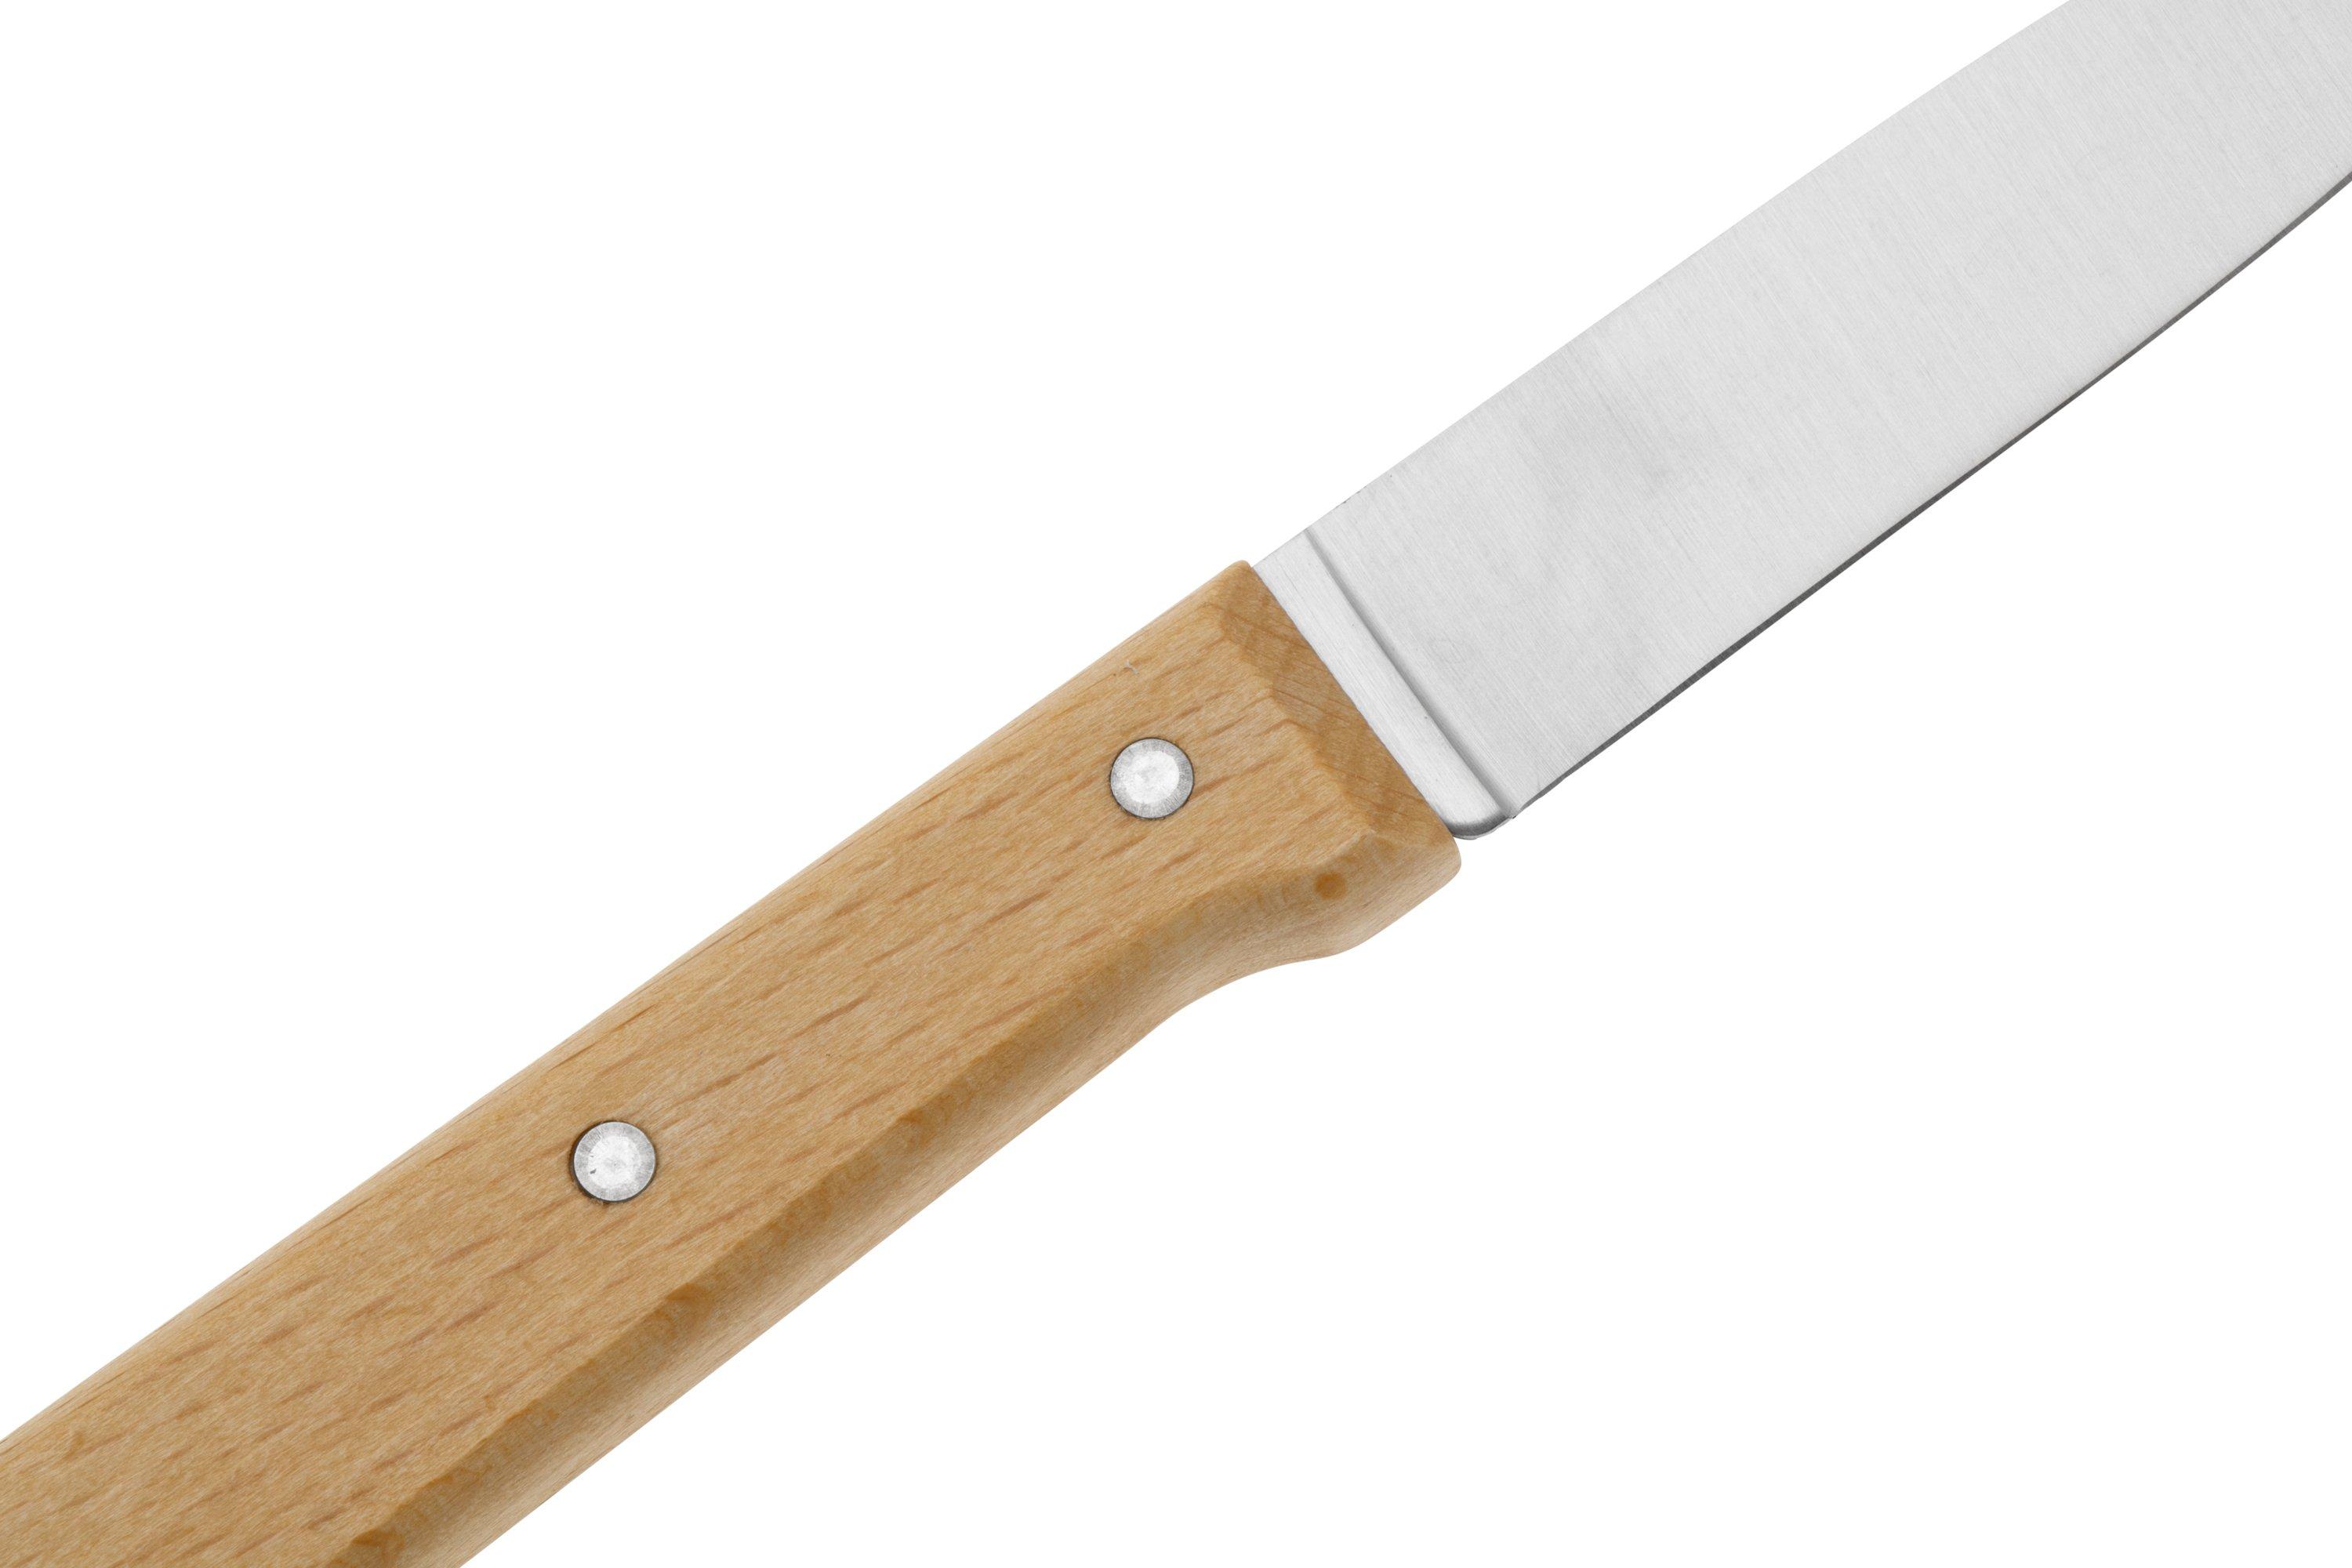 Opinel Parallele No. 125 Paring Knife